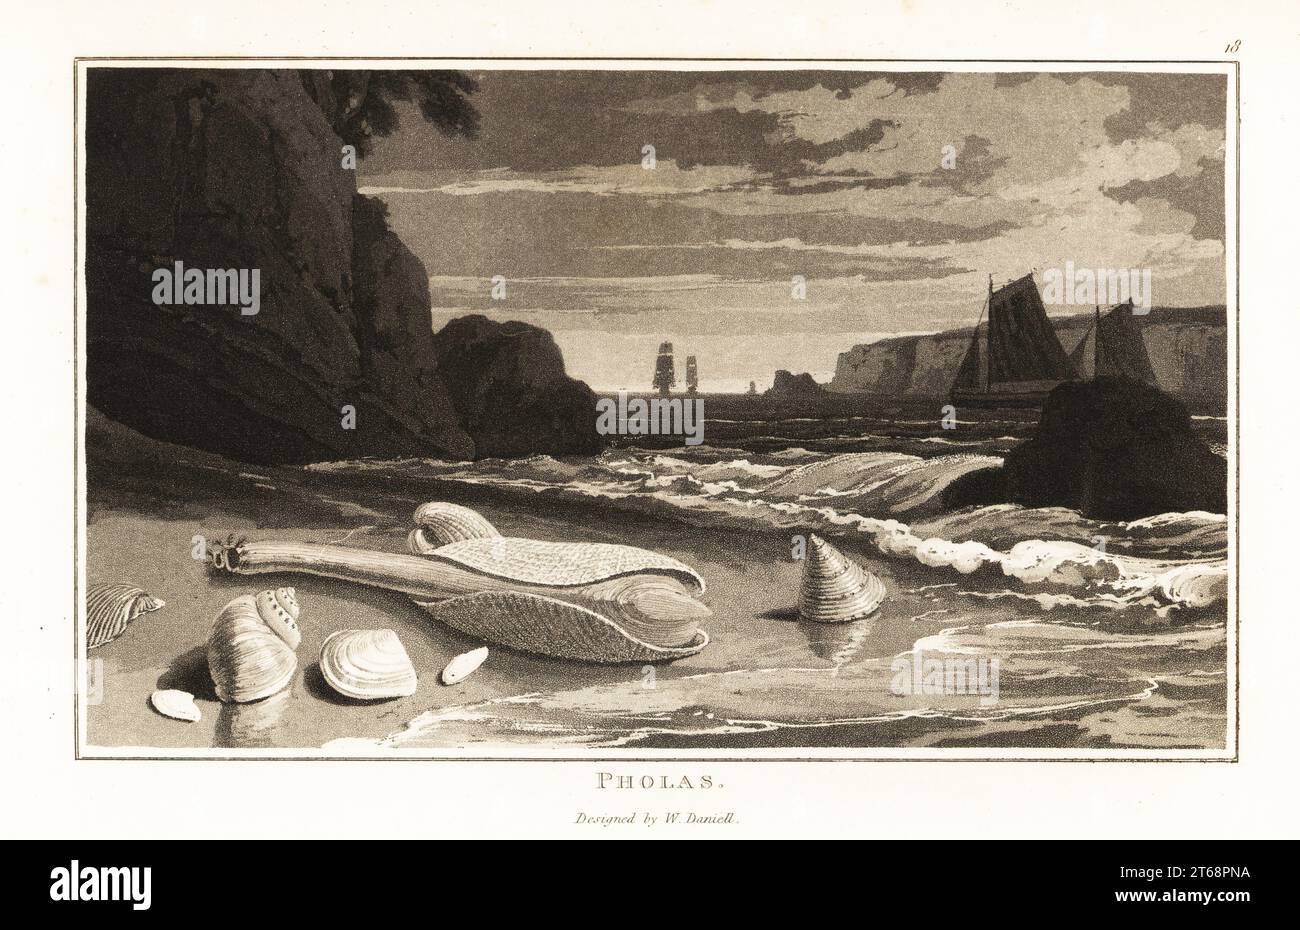 Common piddock or pholas shells, Pholas dactylus, on a beach. Tall ships and sail boats in the channel behind. Aquatint drawn and engraved by William Daniell from William Woods Zoography, Cadell and Davies, 1807. Stock Photo